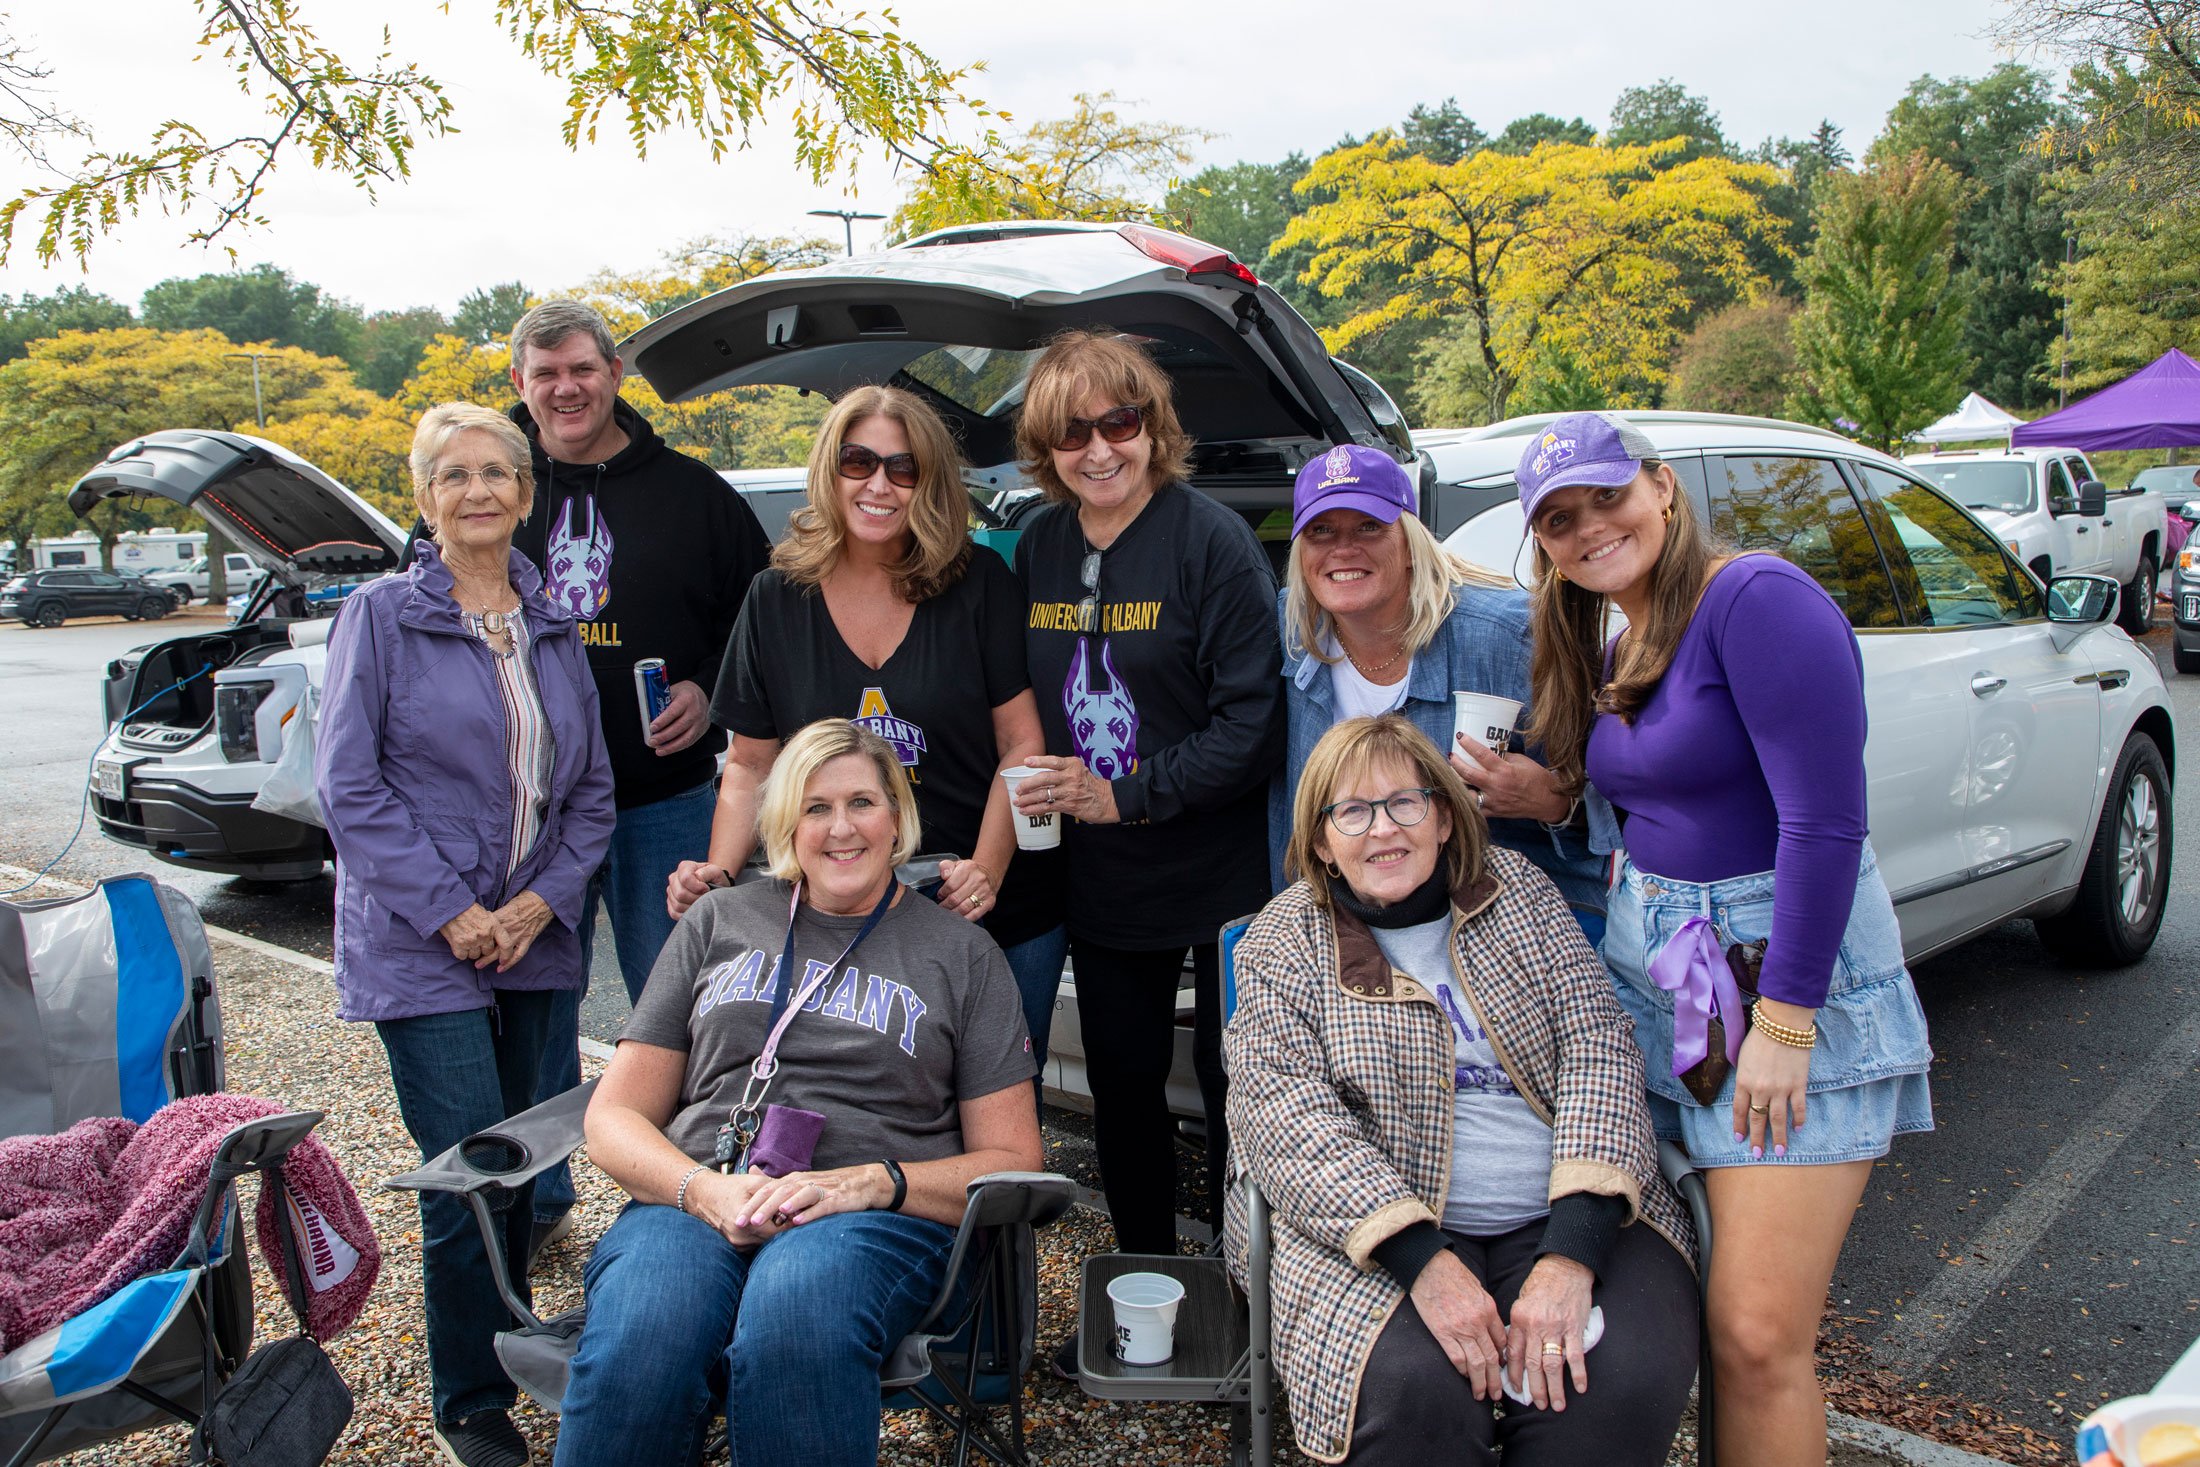 Eight adults, two of whom are sitting in camp chairs, smile as they pose for a photo while tailgating.